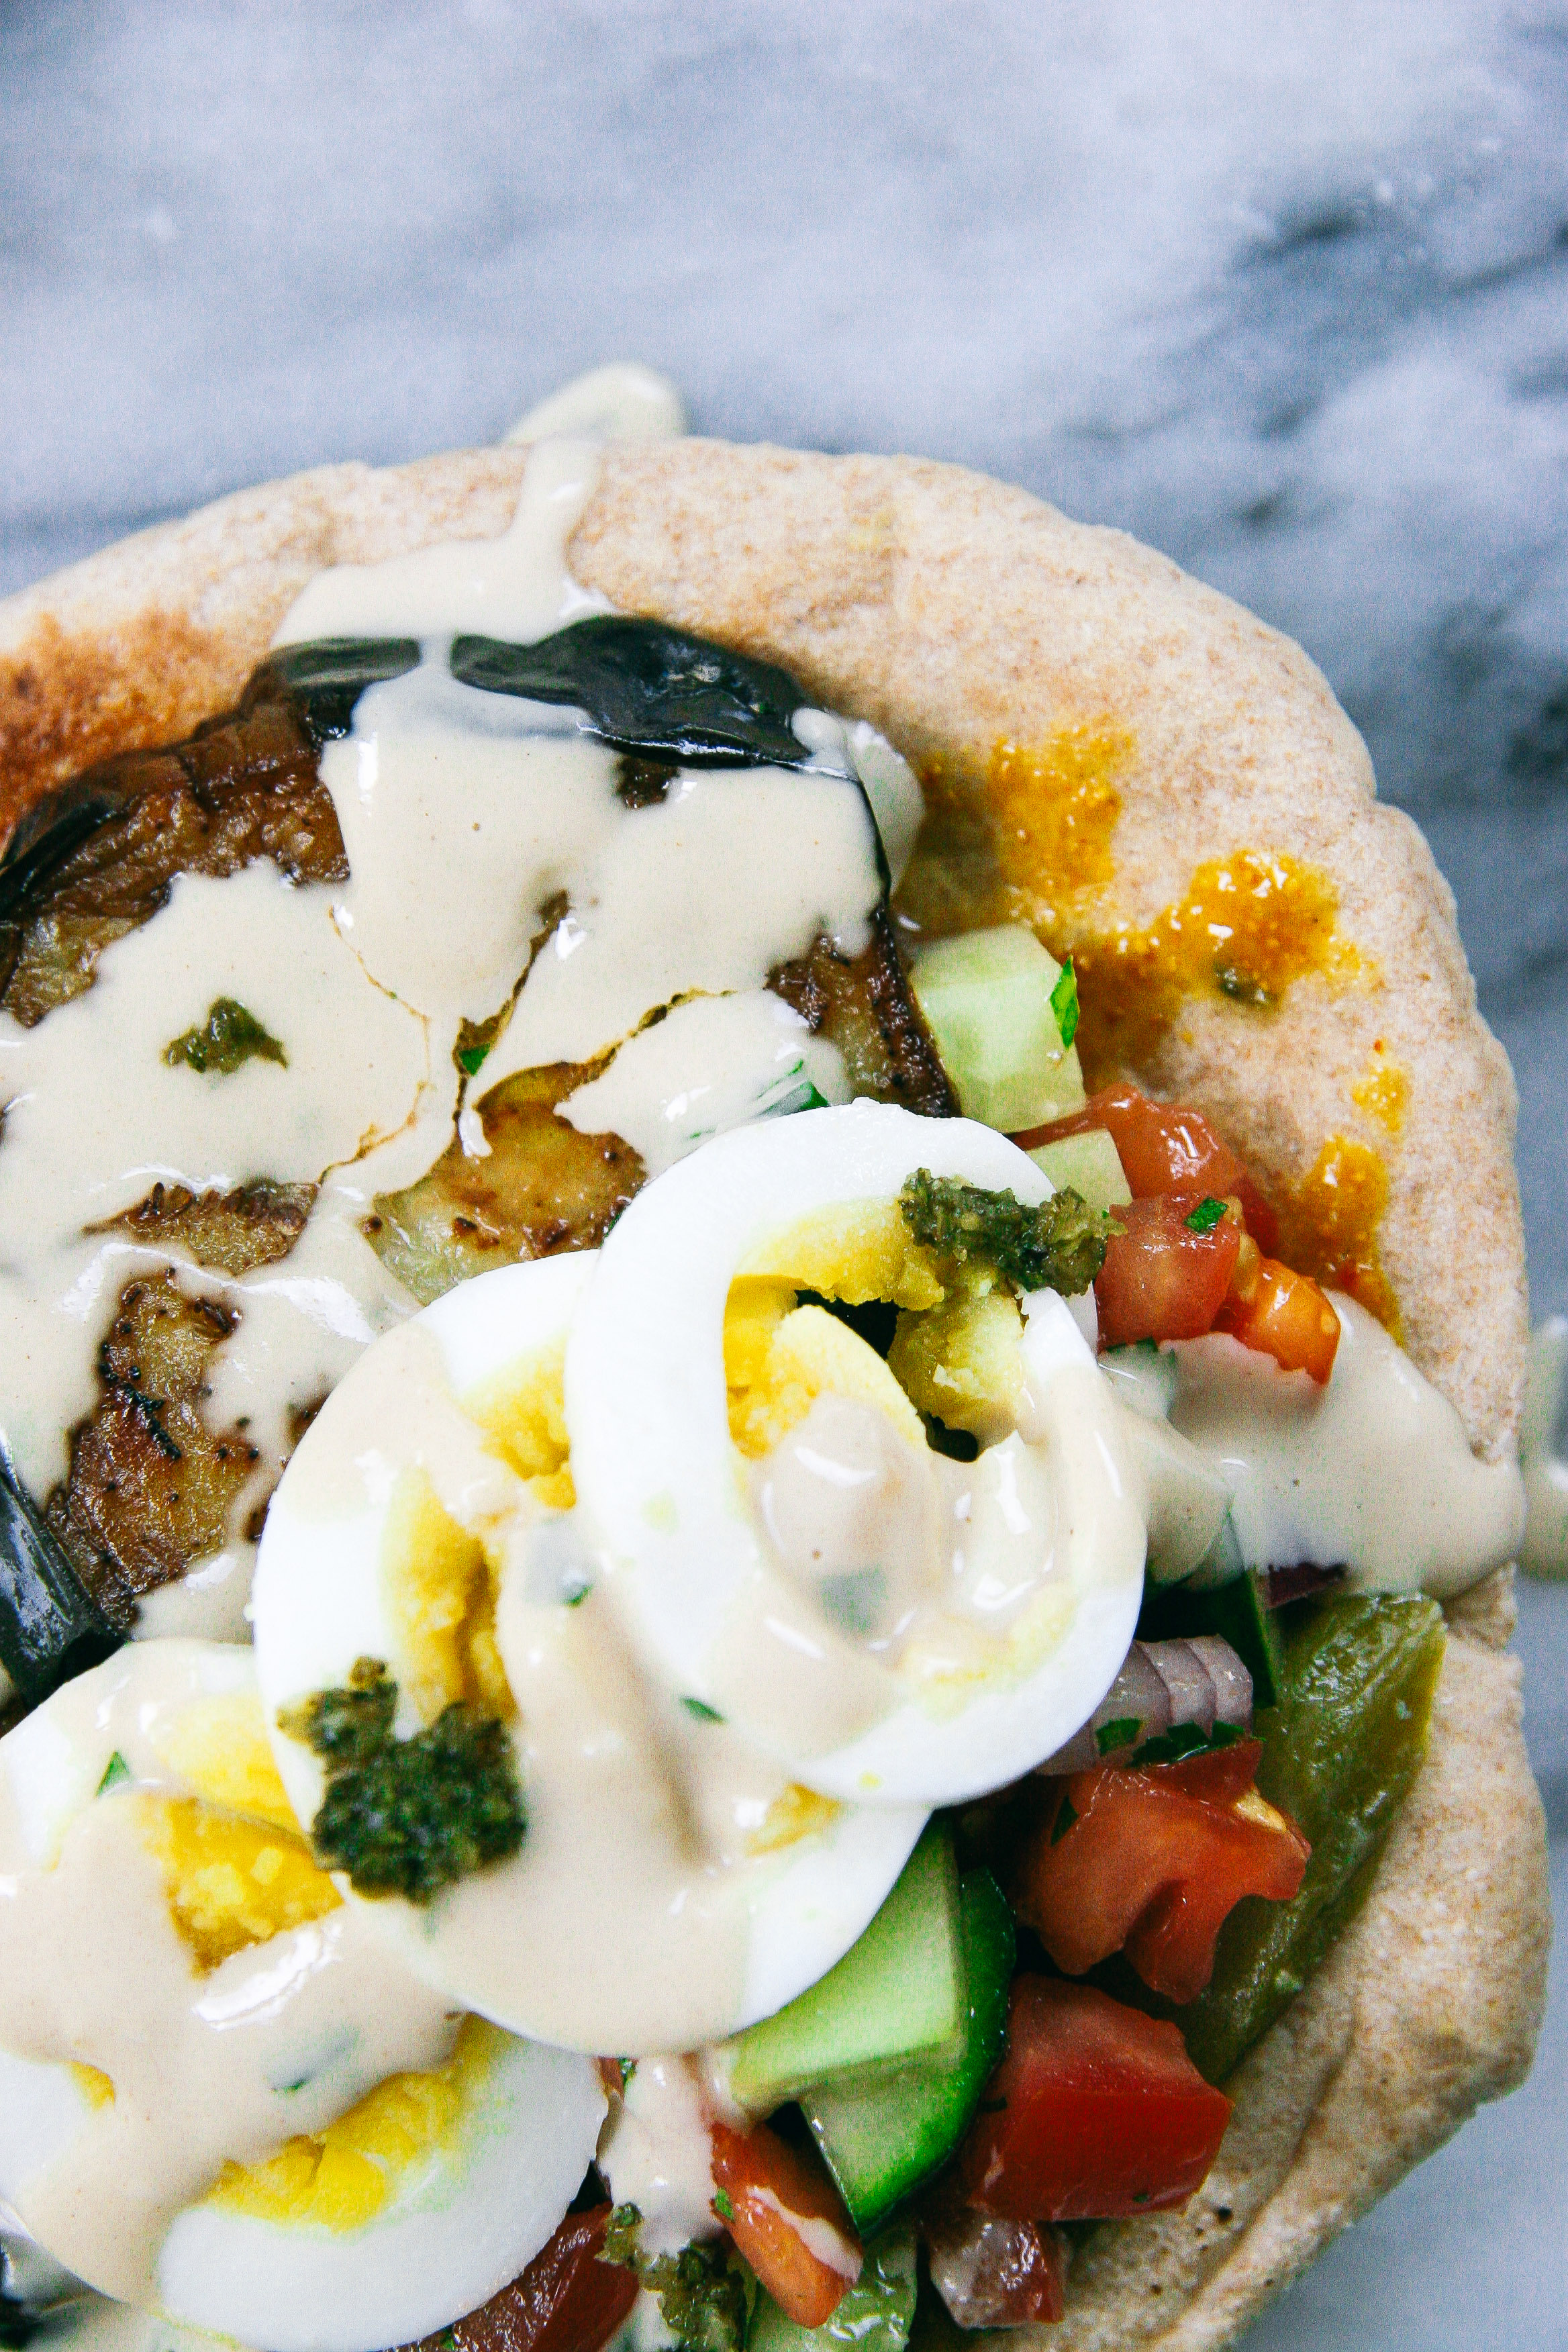 Sabich | Eggplant and Egg Pita Sandwich with Israeli Salad, Pickles, Tahini, Amba, and Schug | I Will Not Eat Oysters